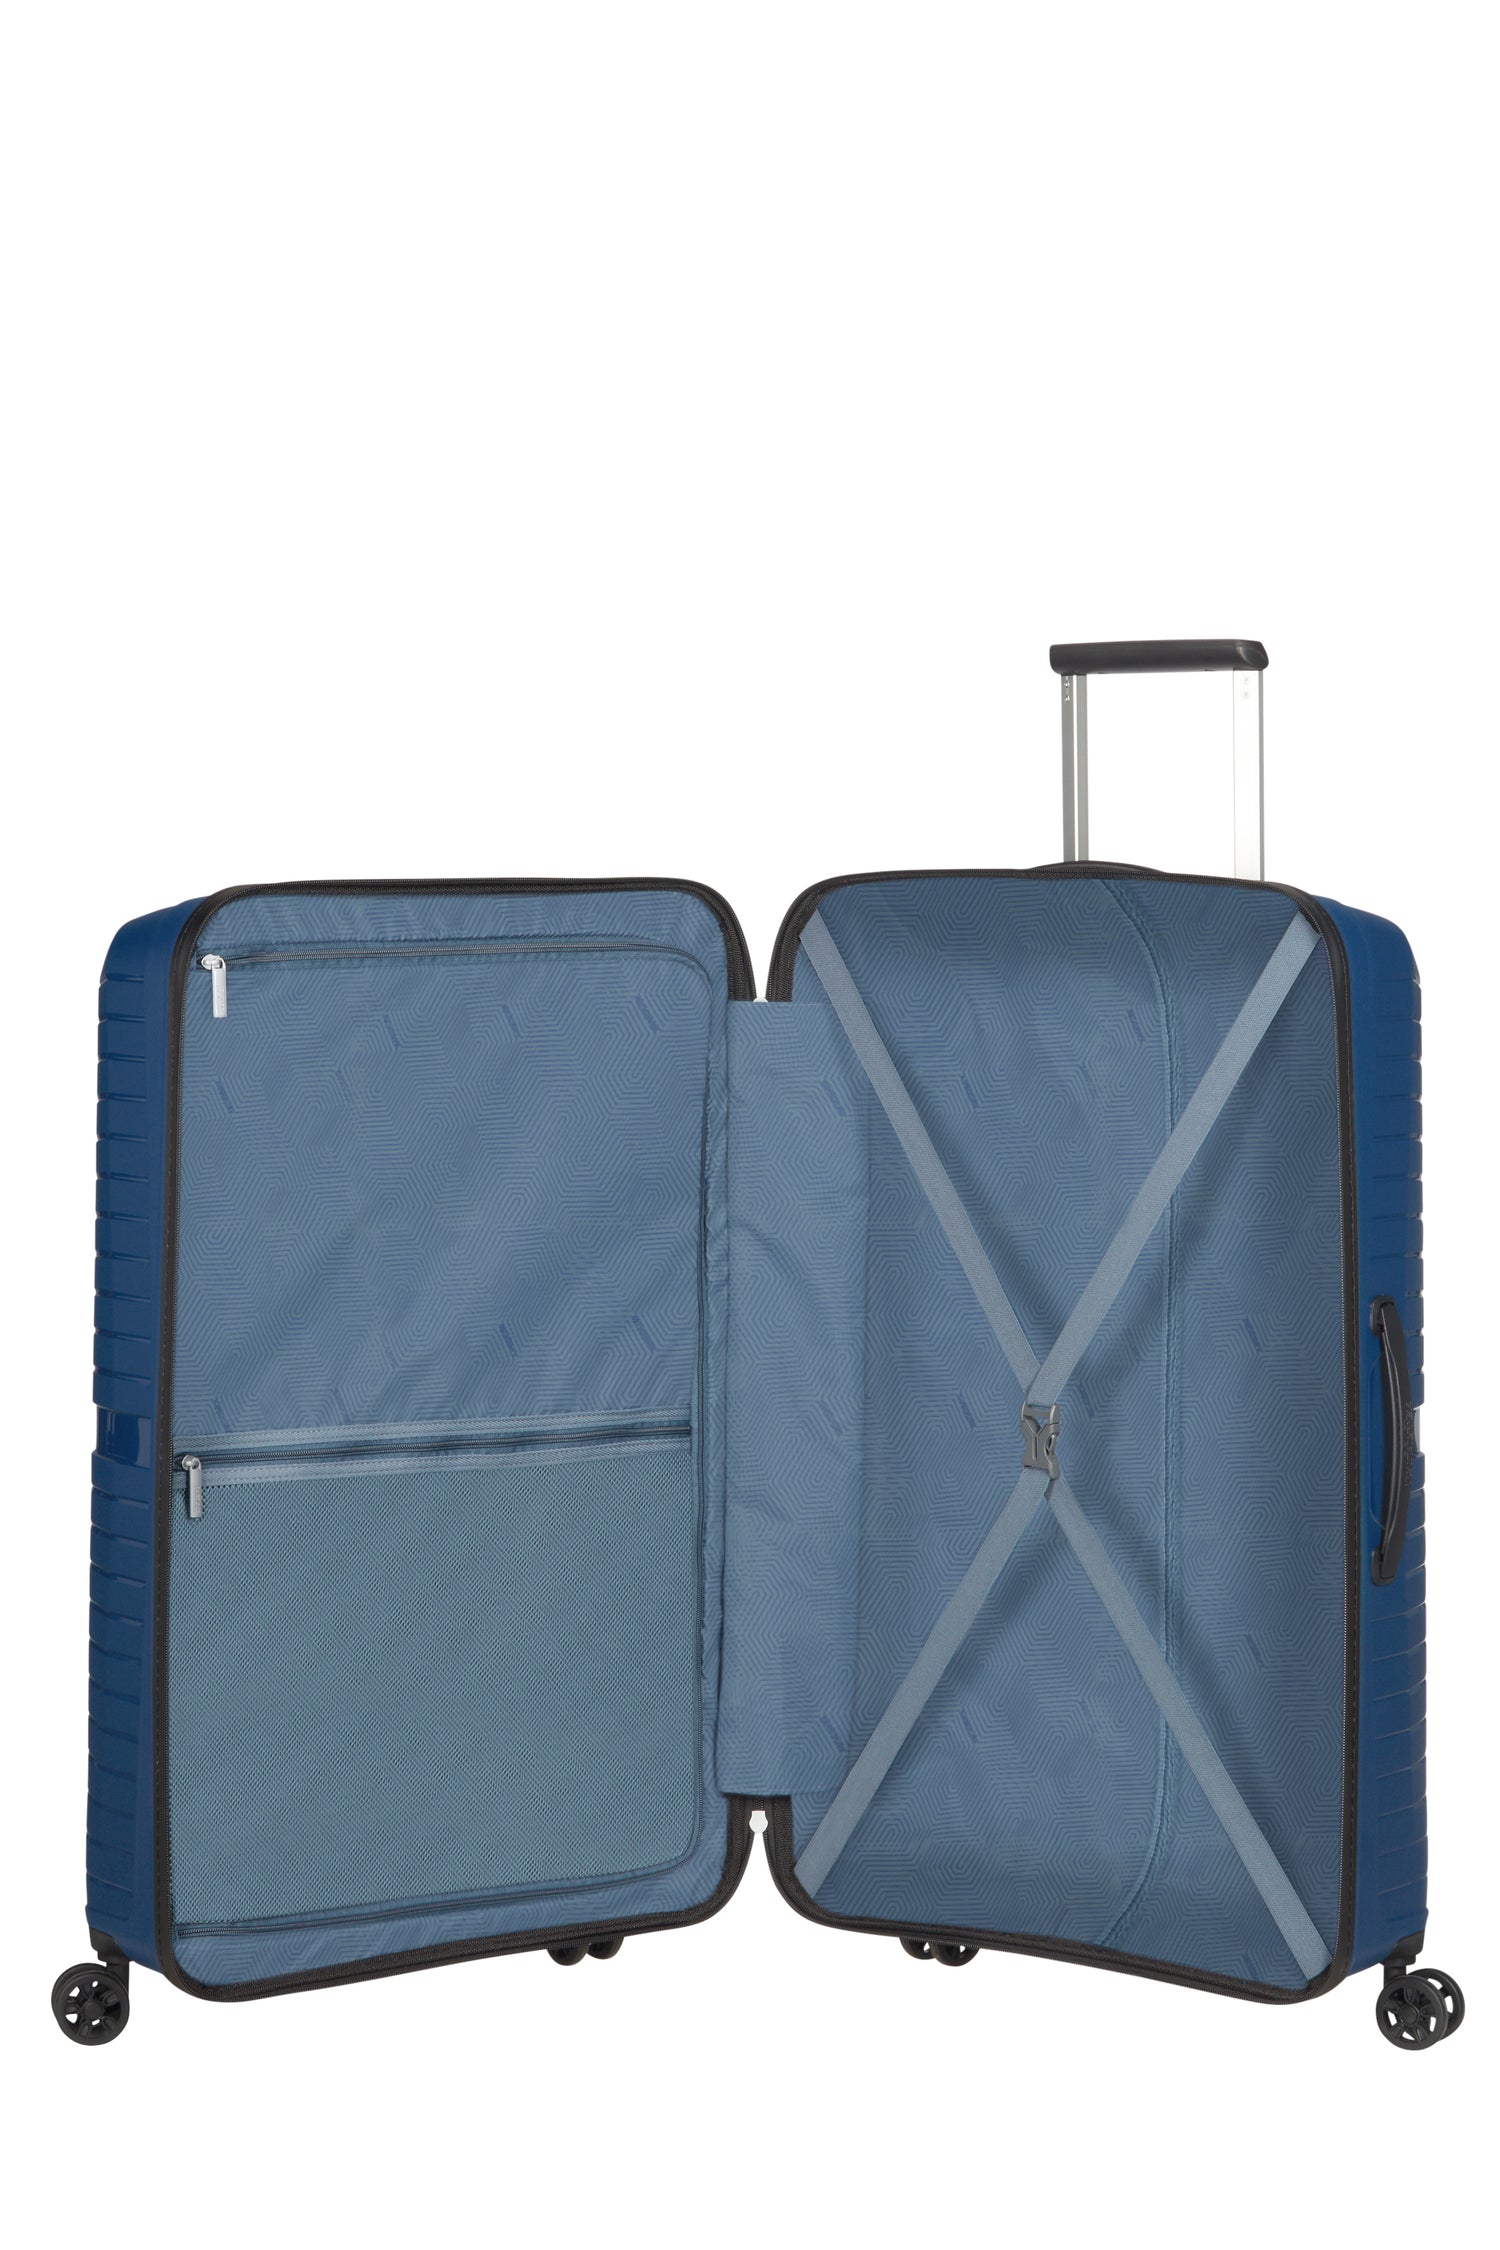 American Tourister Spinner Airconic 79cm